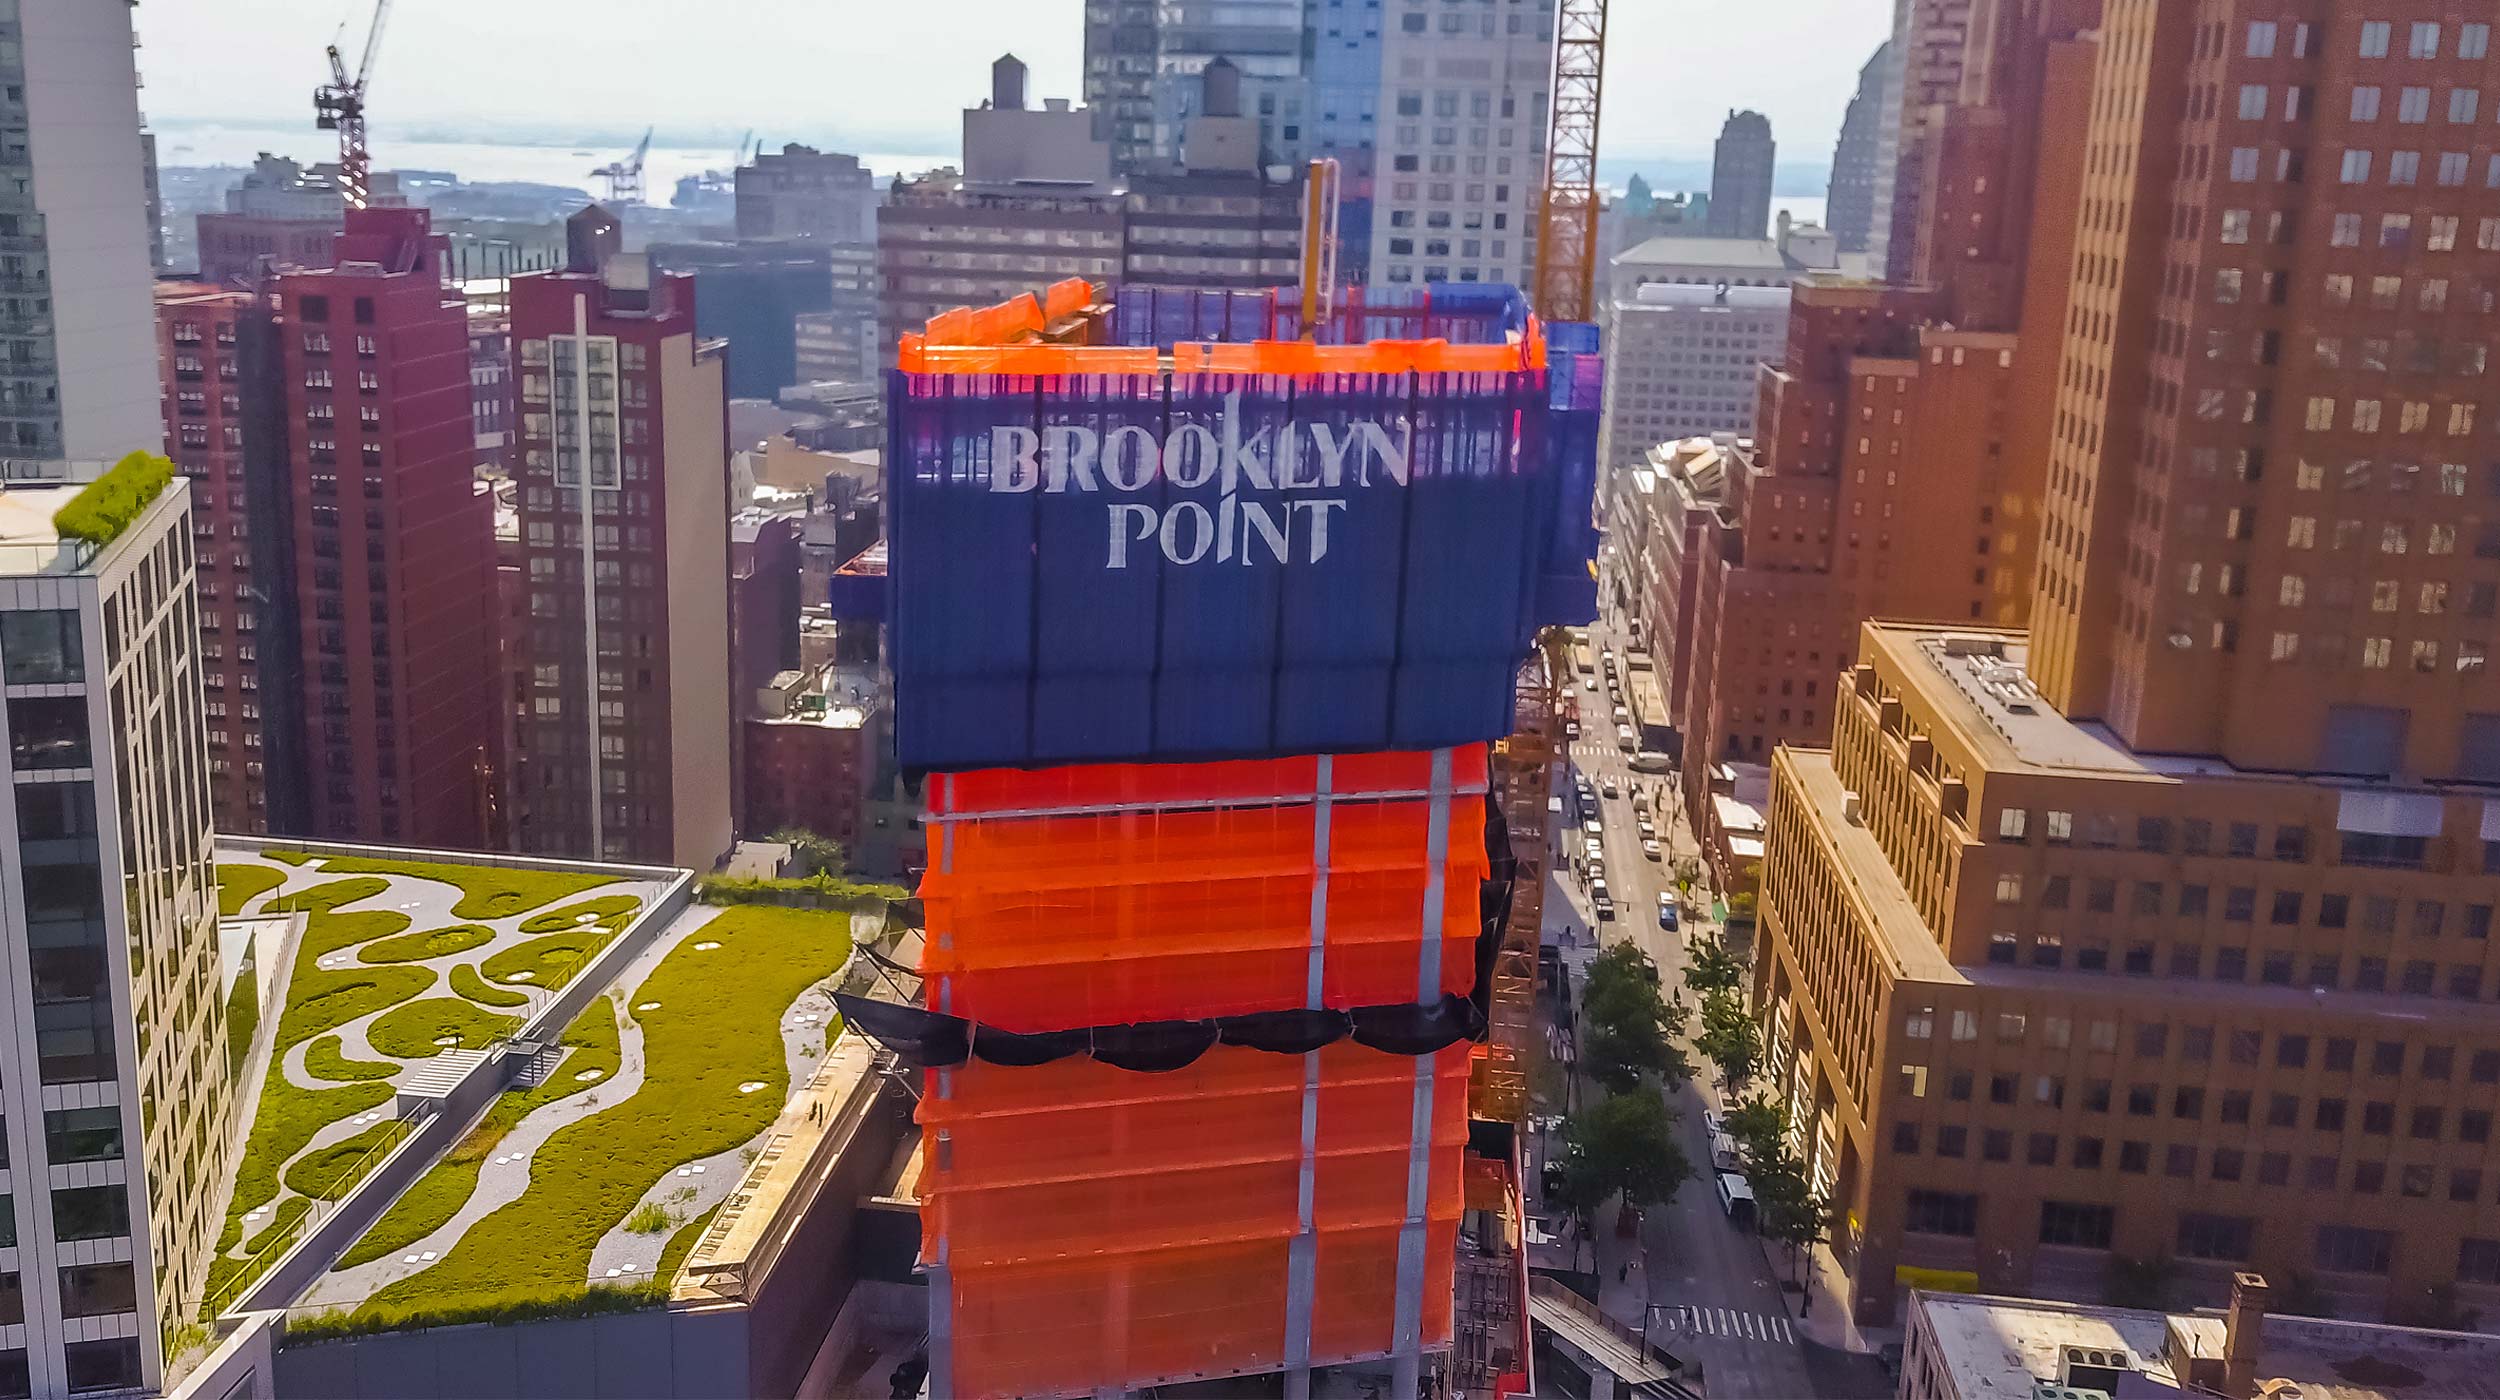 Brooklyn Point is over 720 feet tall with 68 stories. The client chose to use the HWS windscreen, a perimeter cocoon that focuses on perimeter safety for workers in high rise buildings.